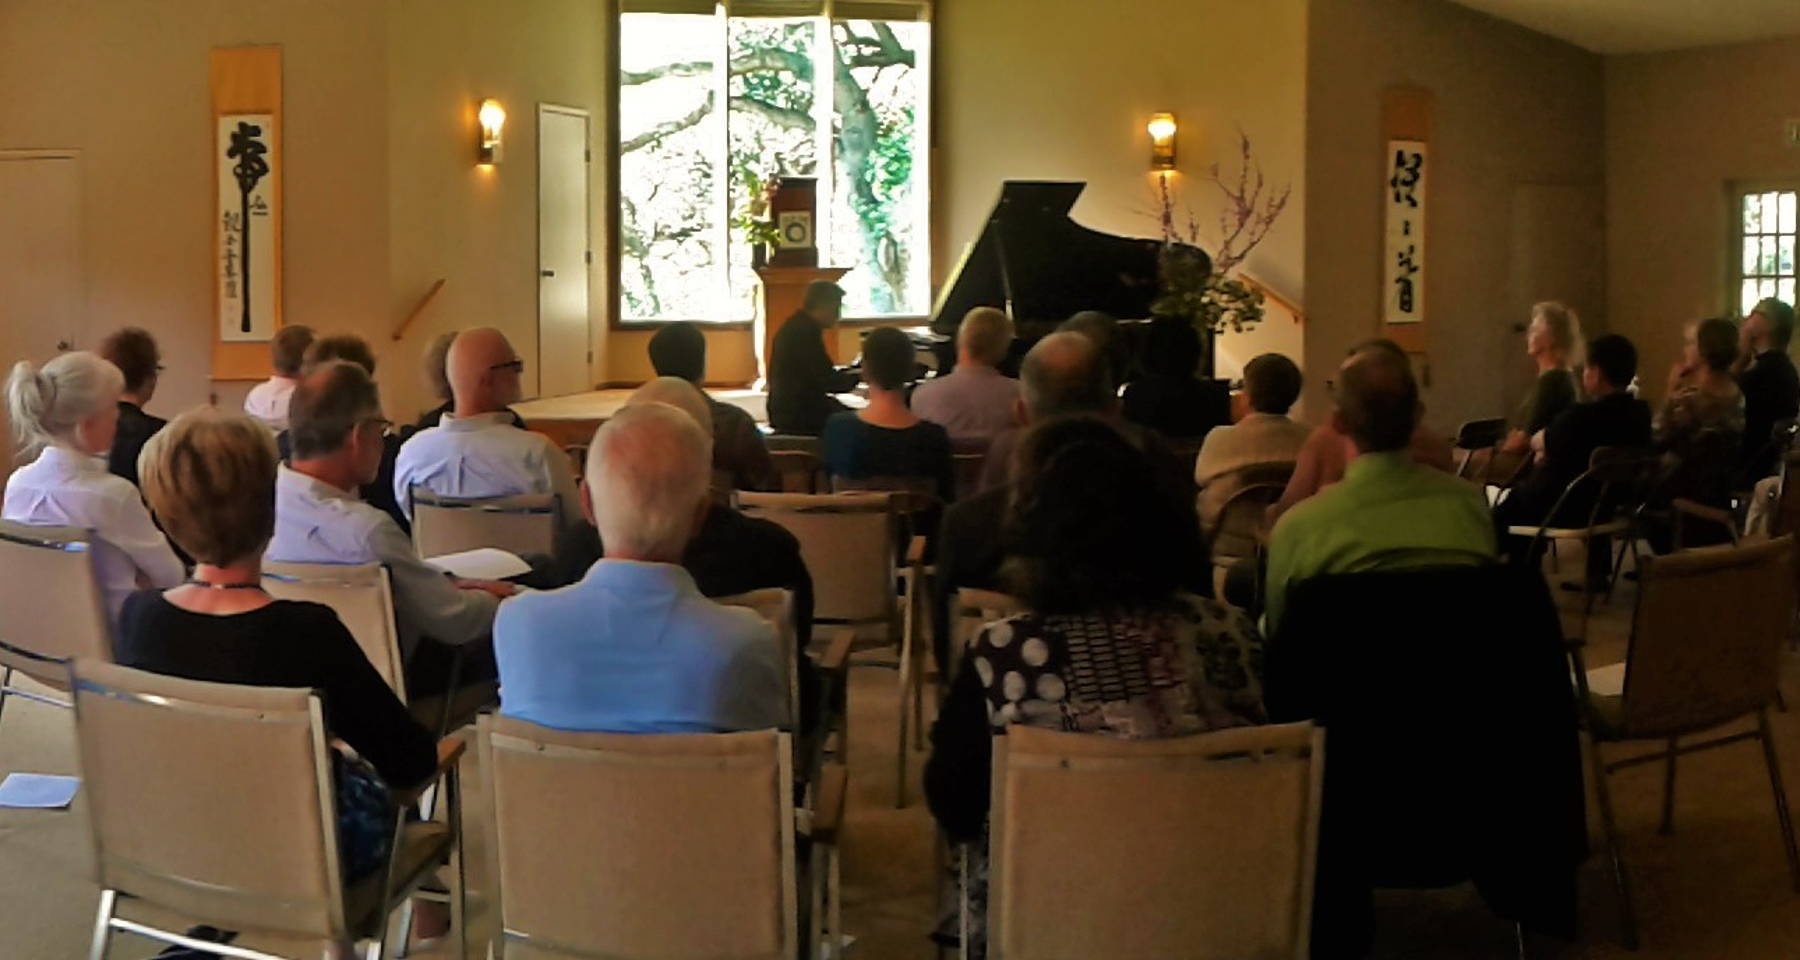 Music in the Zendo - Pianist Peter Gach performs Bach, Chopin and Krause